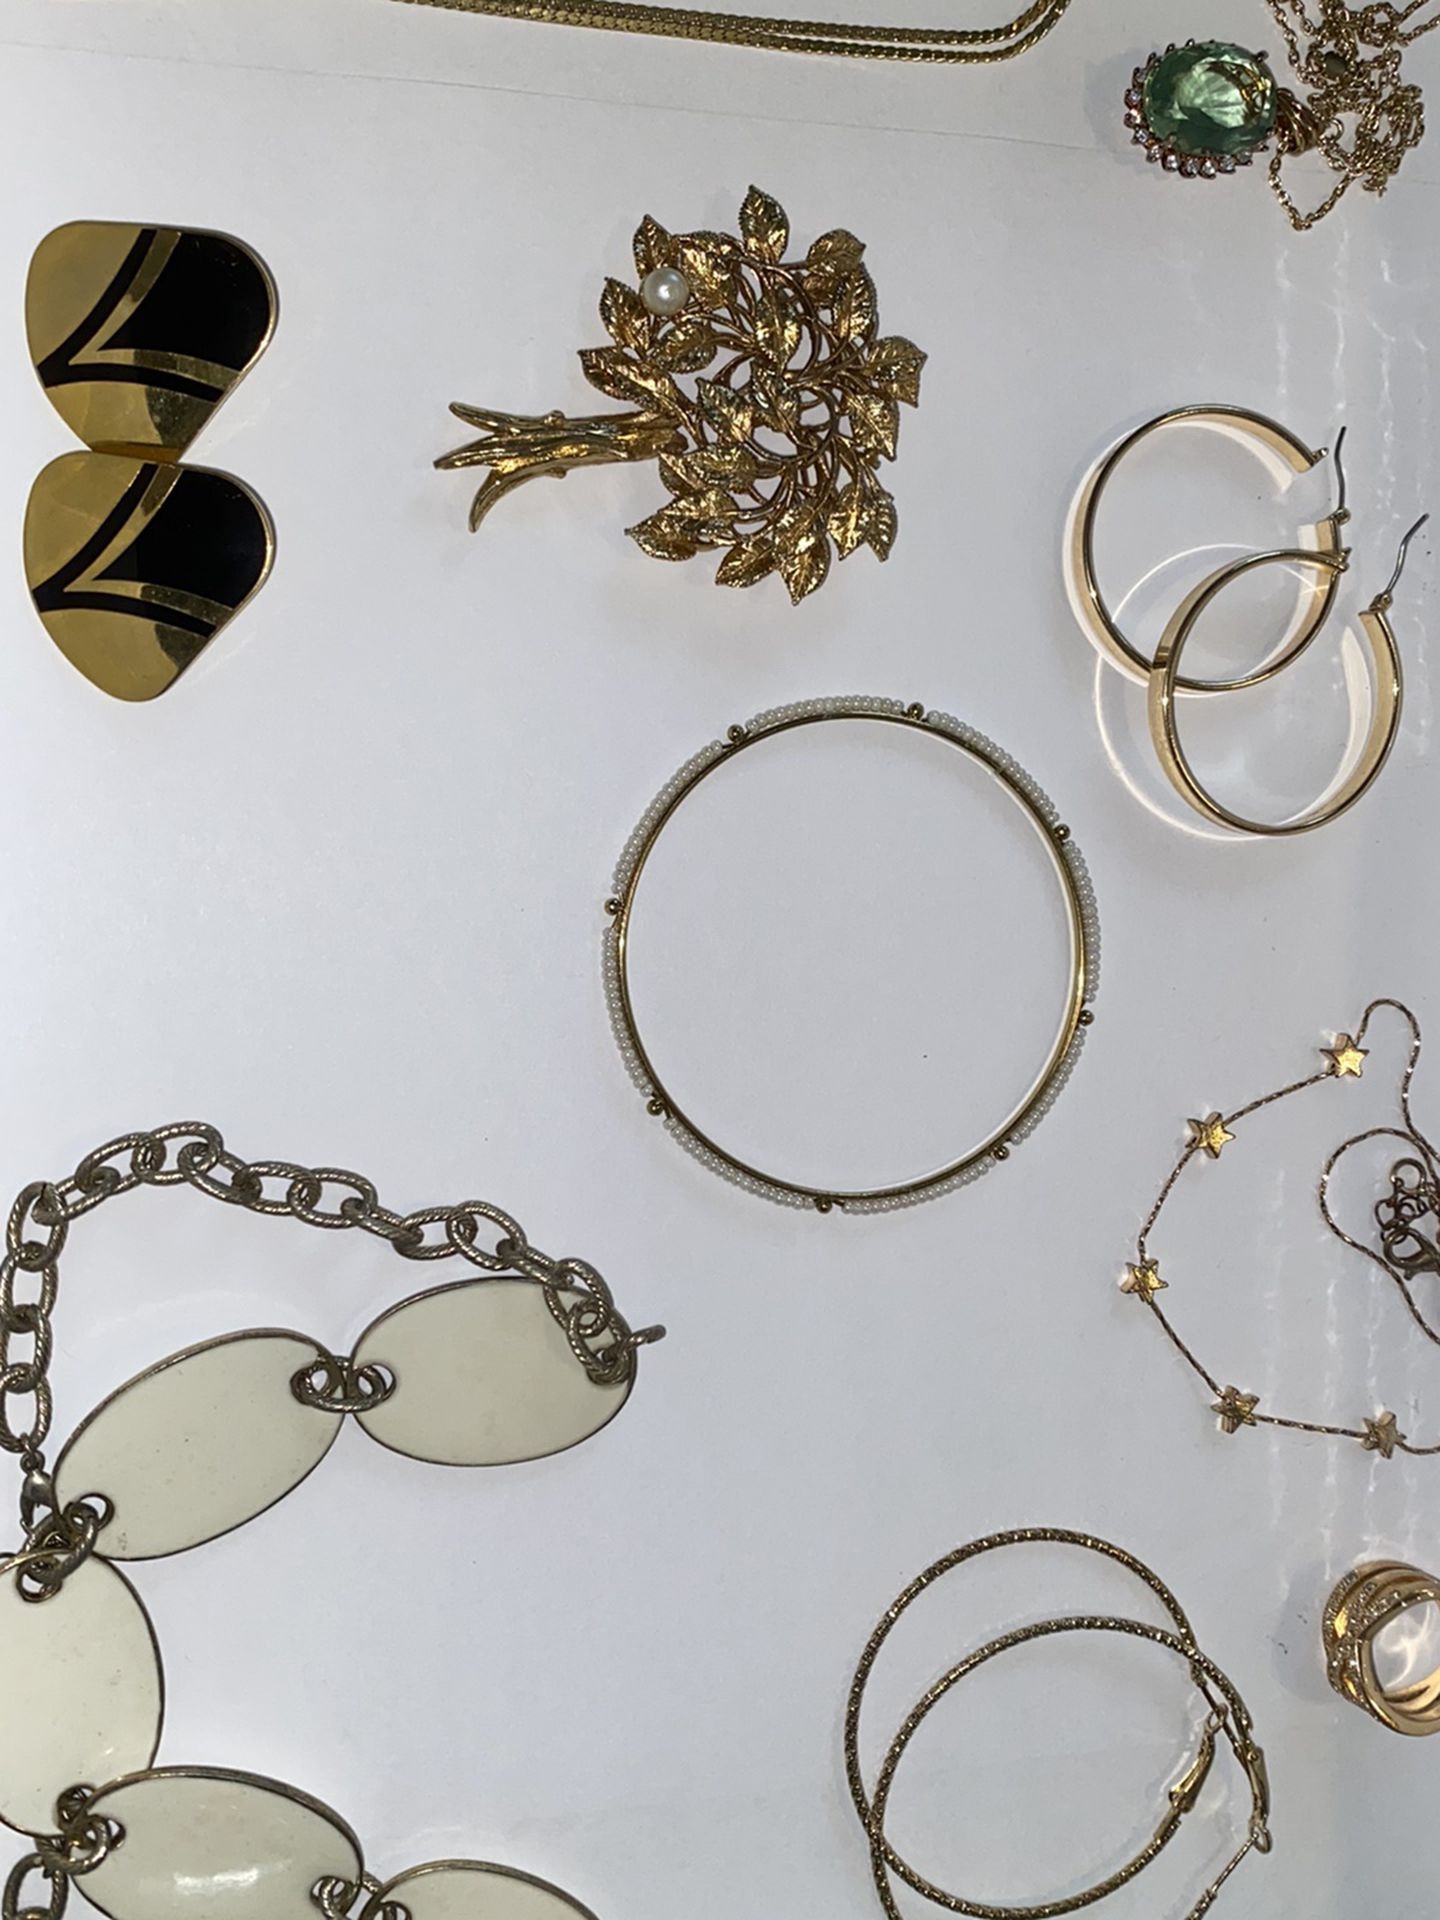 Vintage - Now - Gold Tone - 1+ lb Jewelry Bag - 10 Pieces Mixed